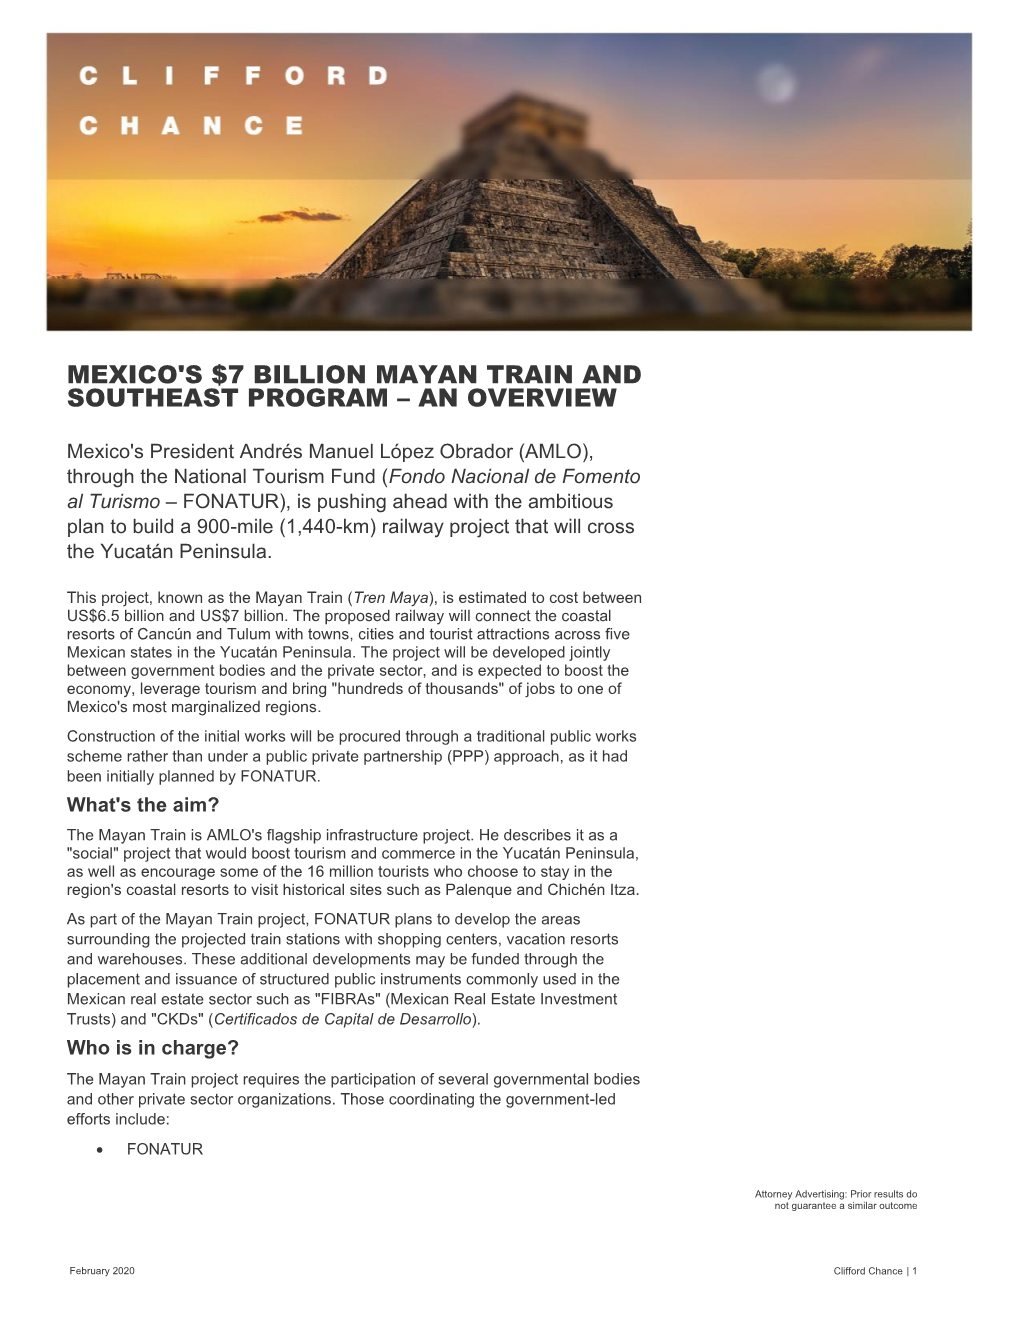 Mexico's $7 Billion Mayan Train and Southeast Program – an Overview